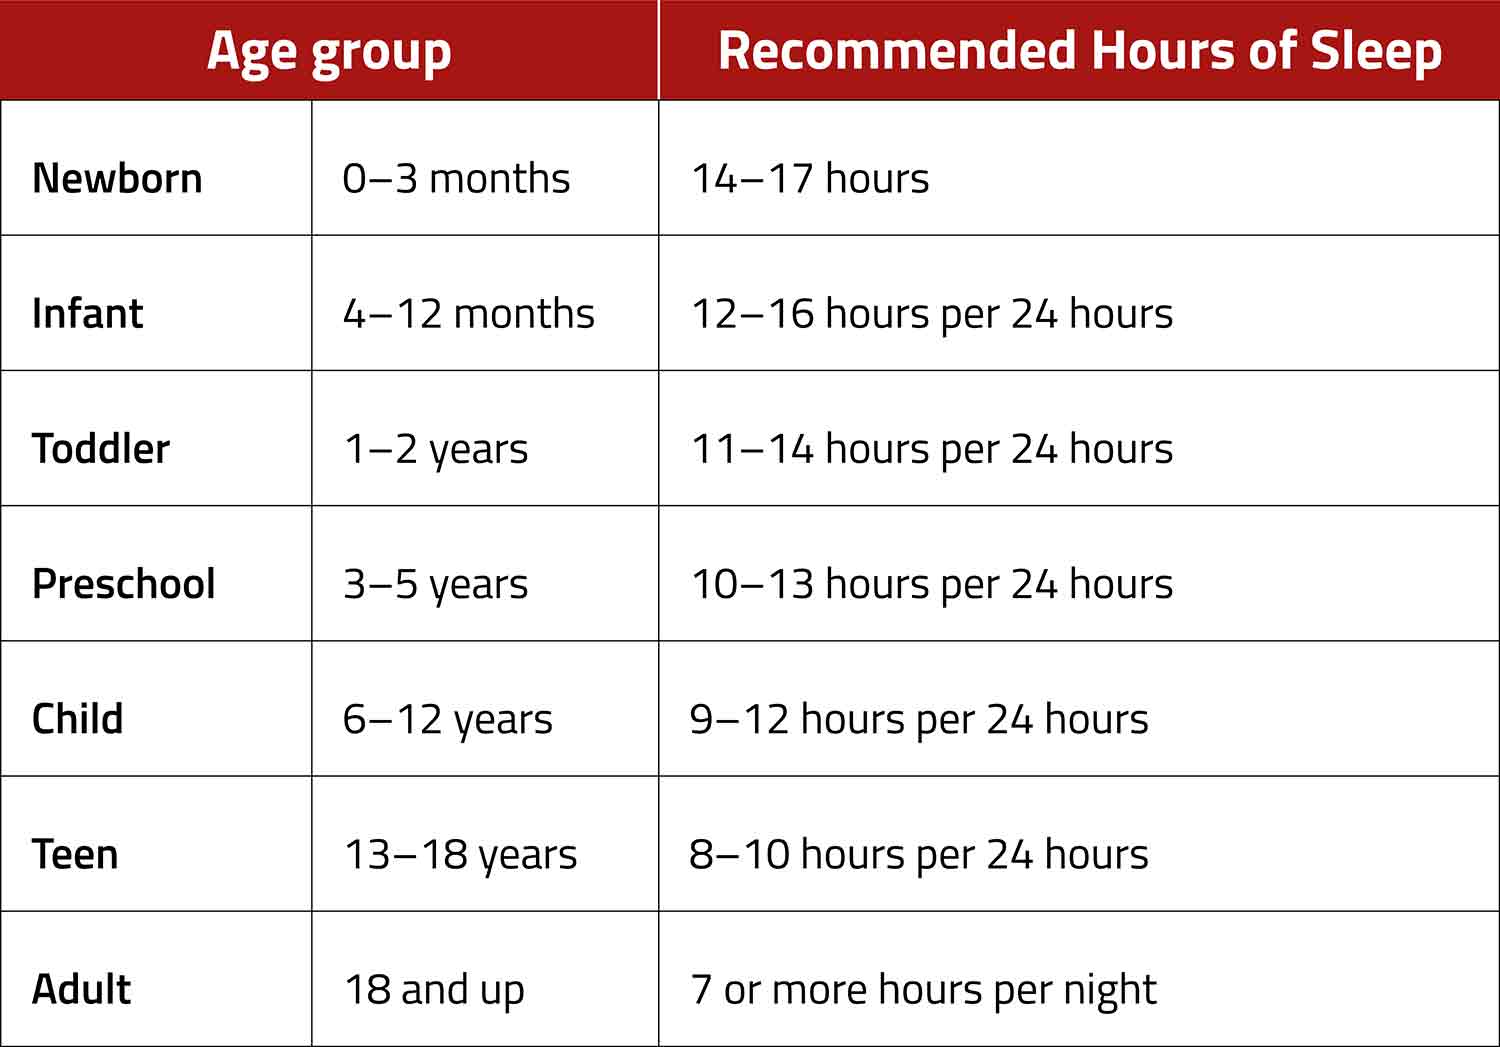 Alt text: Table showing the recommended number of hours of sleep for seven age groups